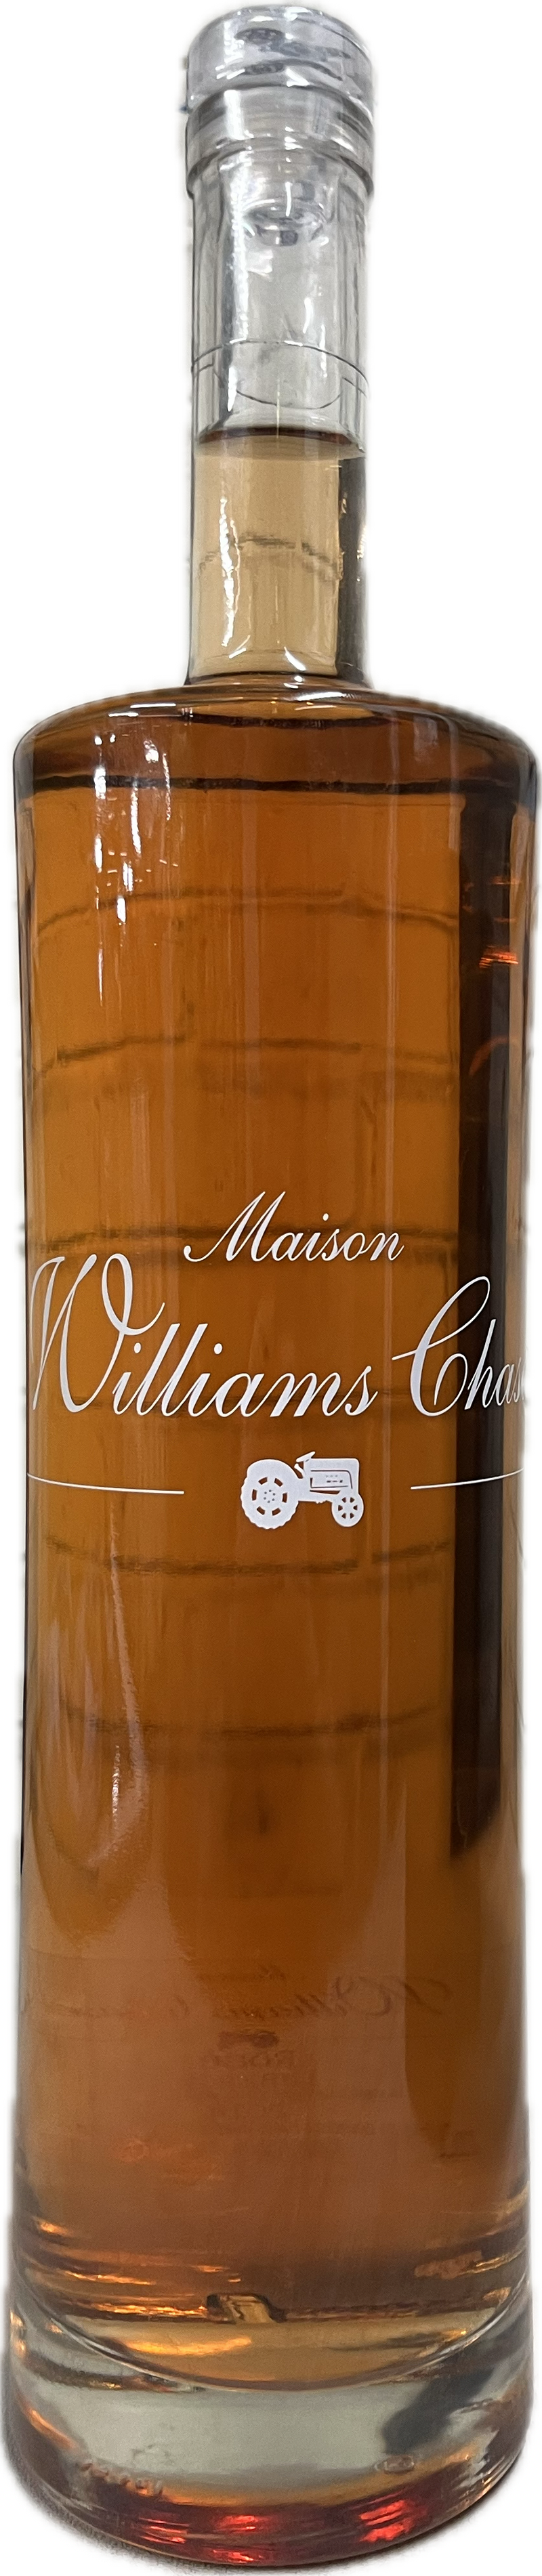 Maison Williams Chase Rose Wine 1.5ltr